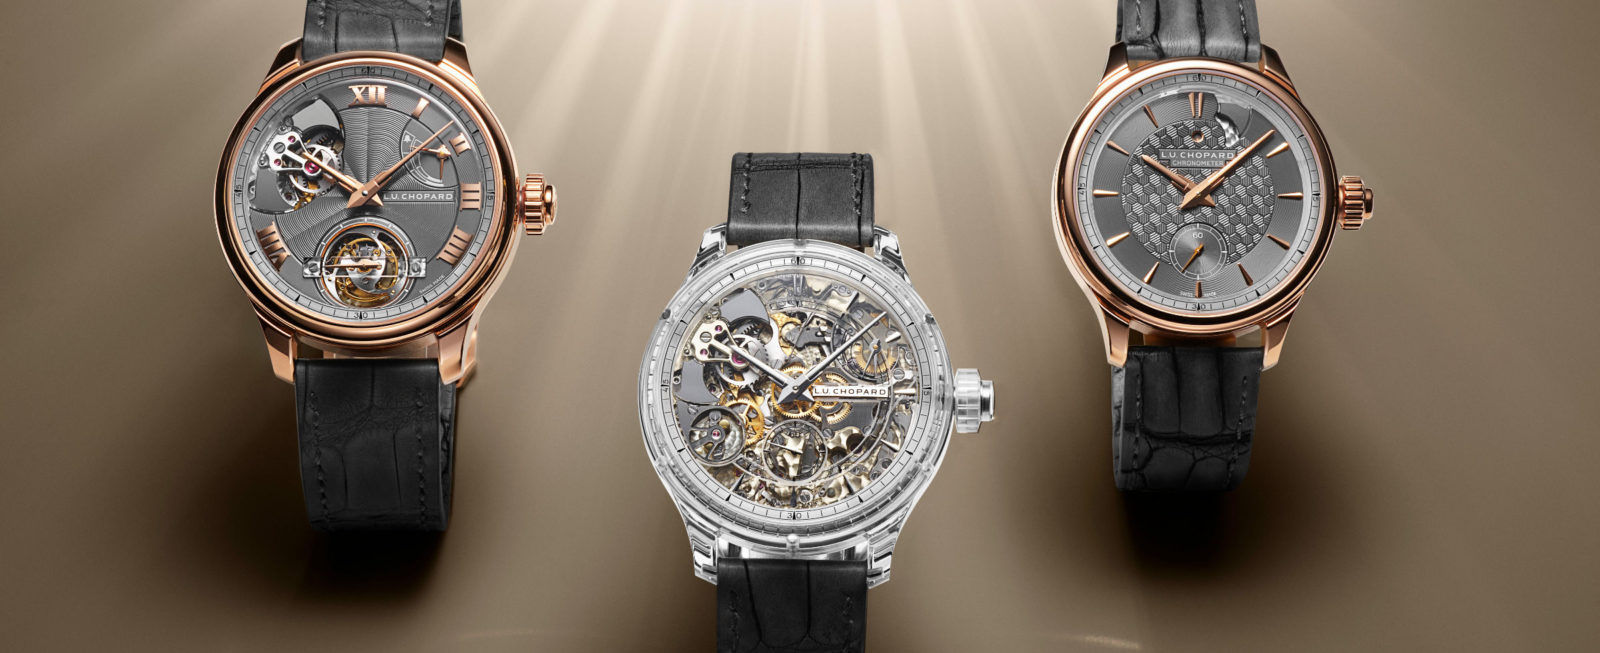 Chopard Introduces Show-worthy Timepieces at Watches and Wonders 2022